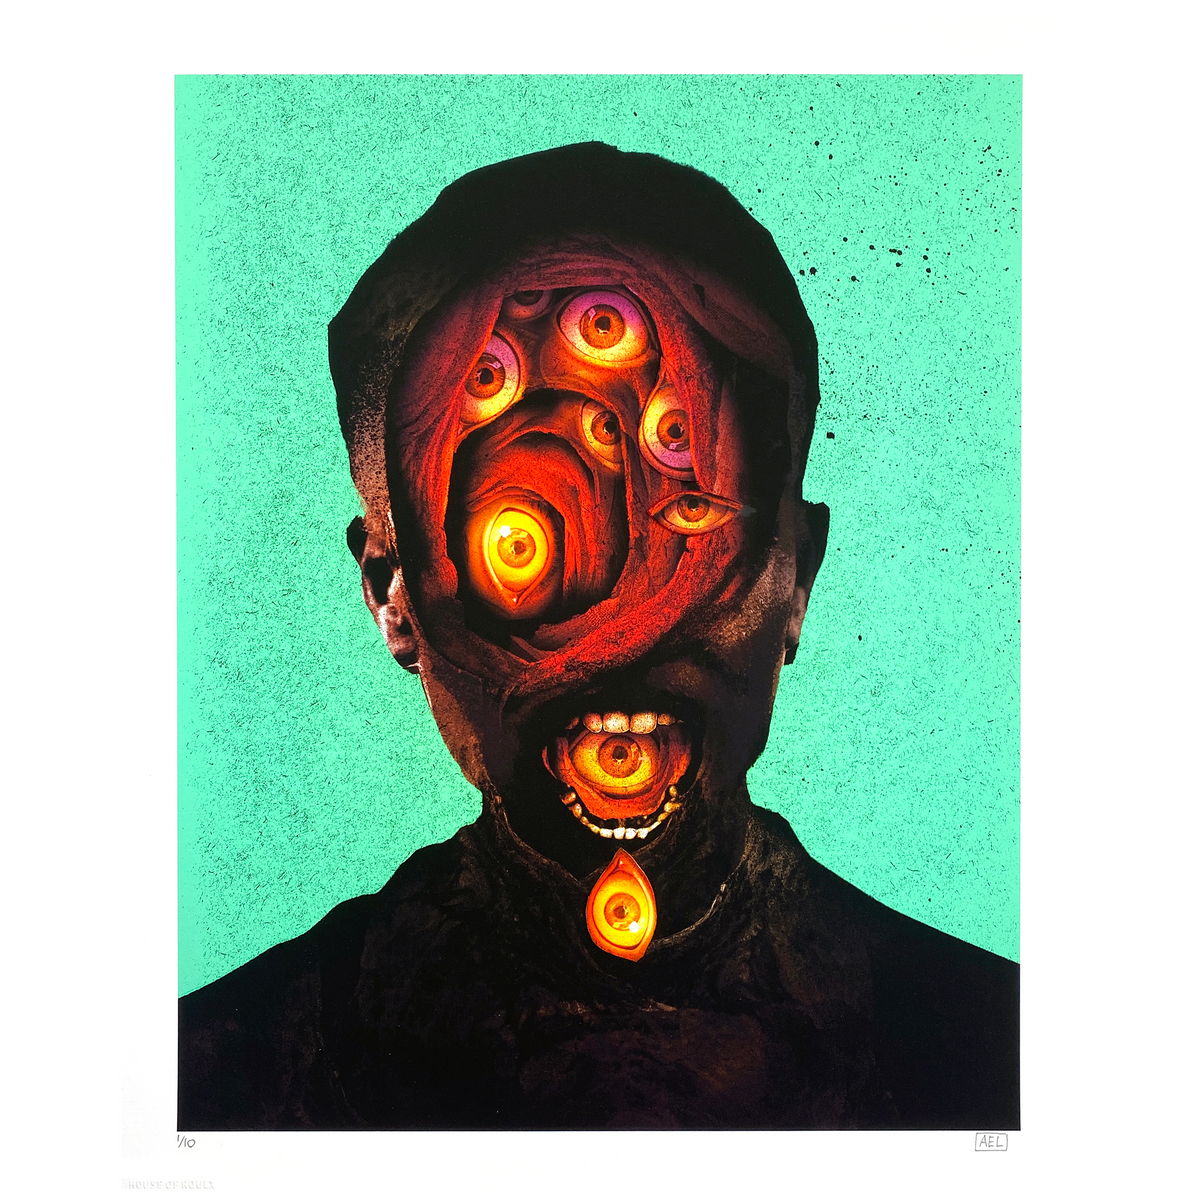 Alex Eckman-Lawn &quot;All Eyes&quot; - Hand-Embellished Edition of 10 - 14 x 17&quot;